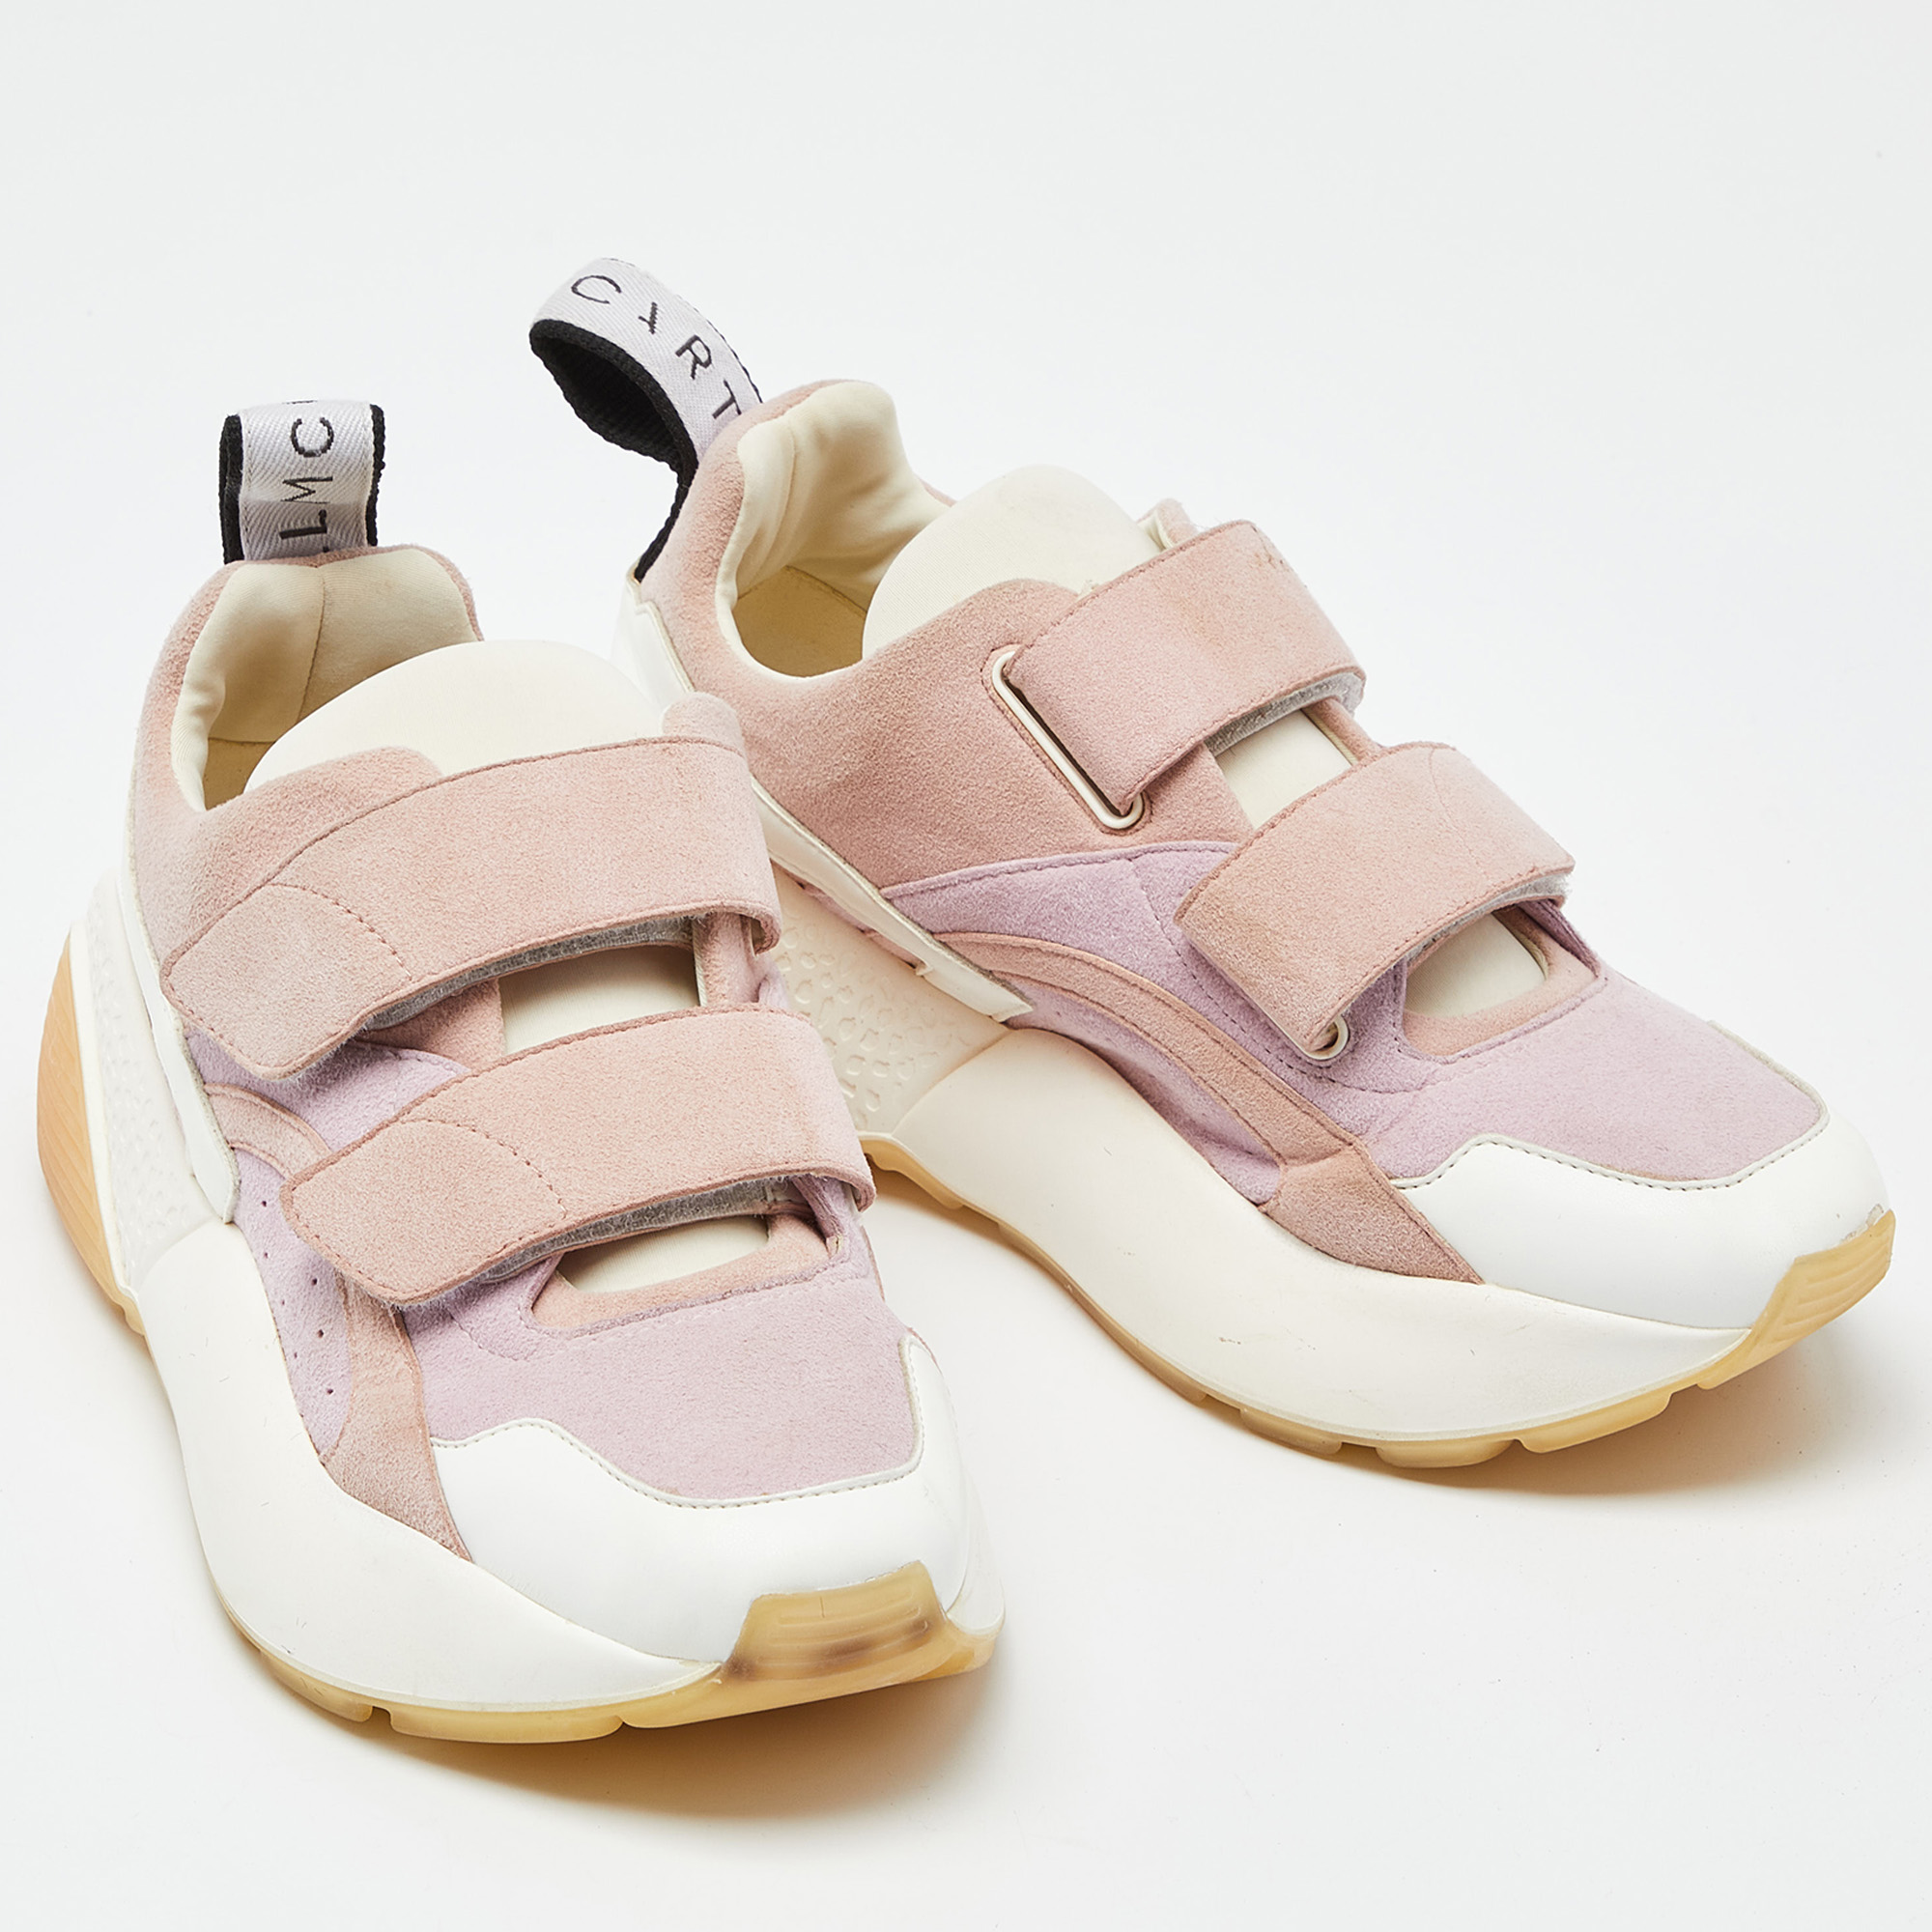 Stella McCartney Pink/White Faux Leather And Faux Suede Eclypse Lace Up Sneakers Size 37